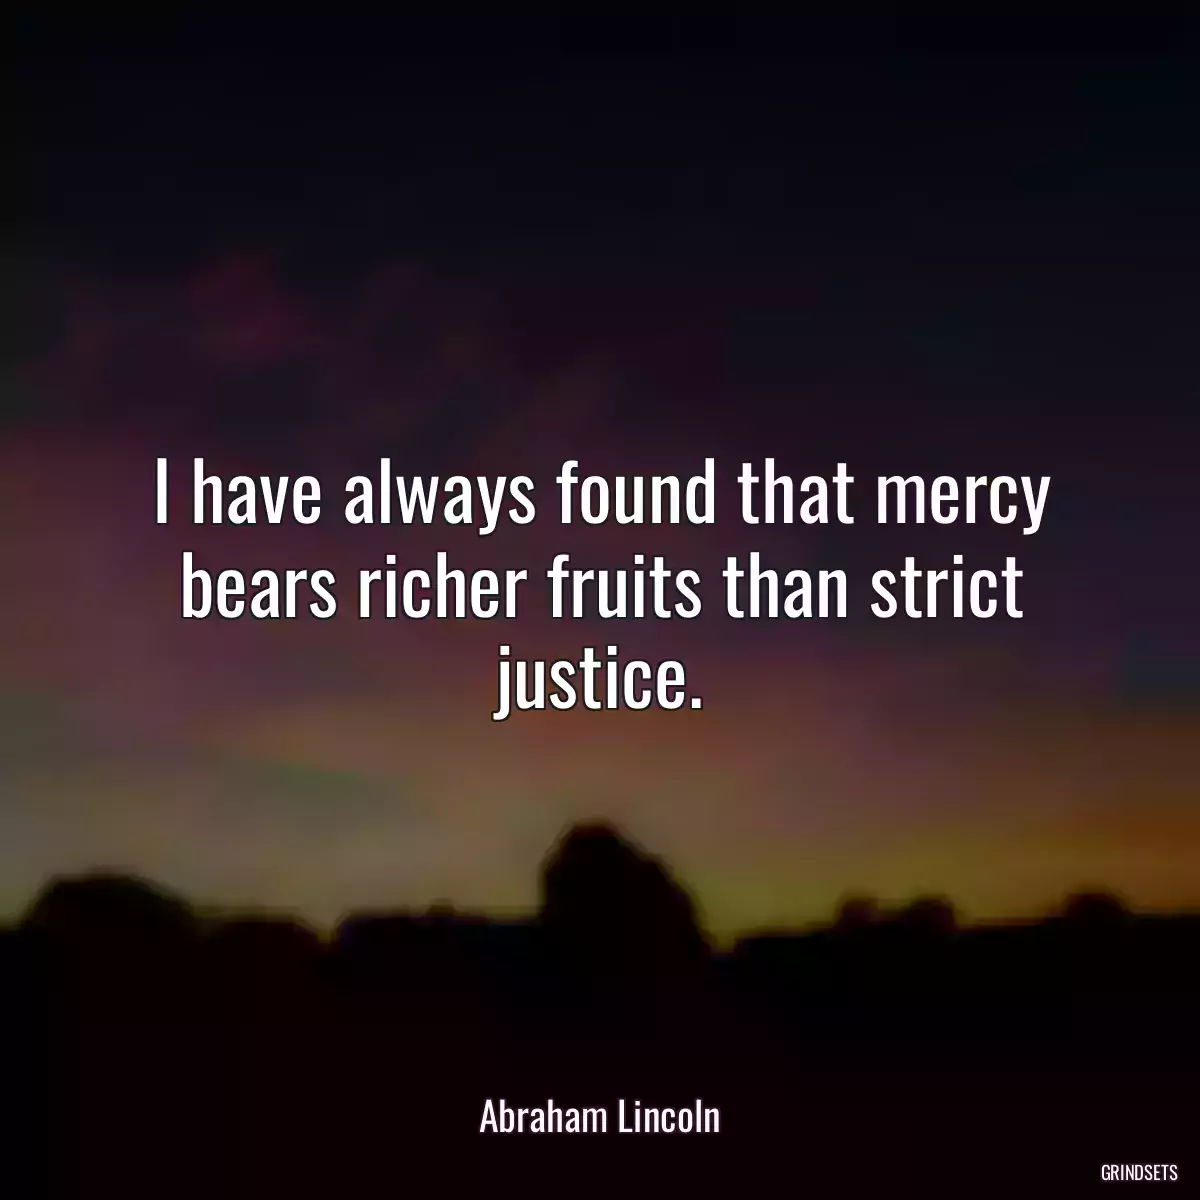 I have always found that mercy bears richer fruits than strict justice.